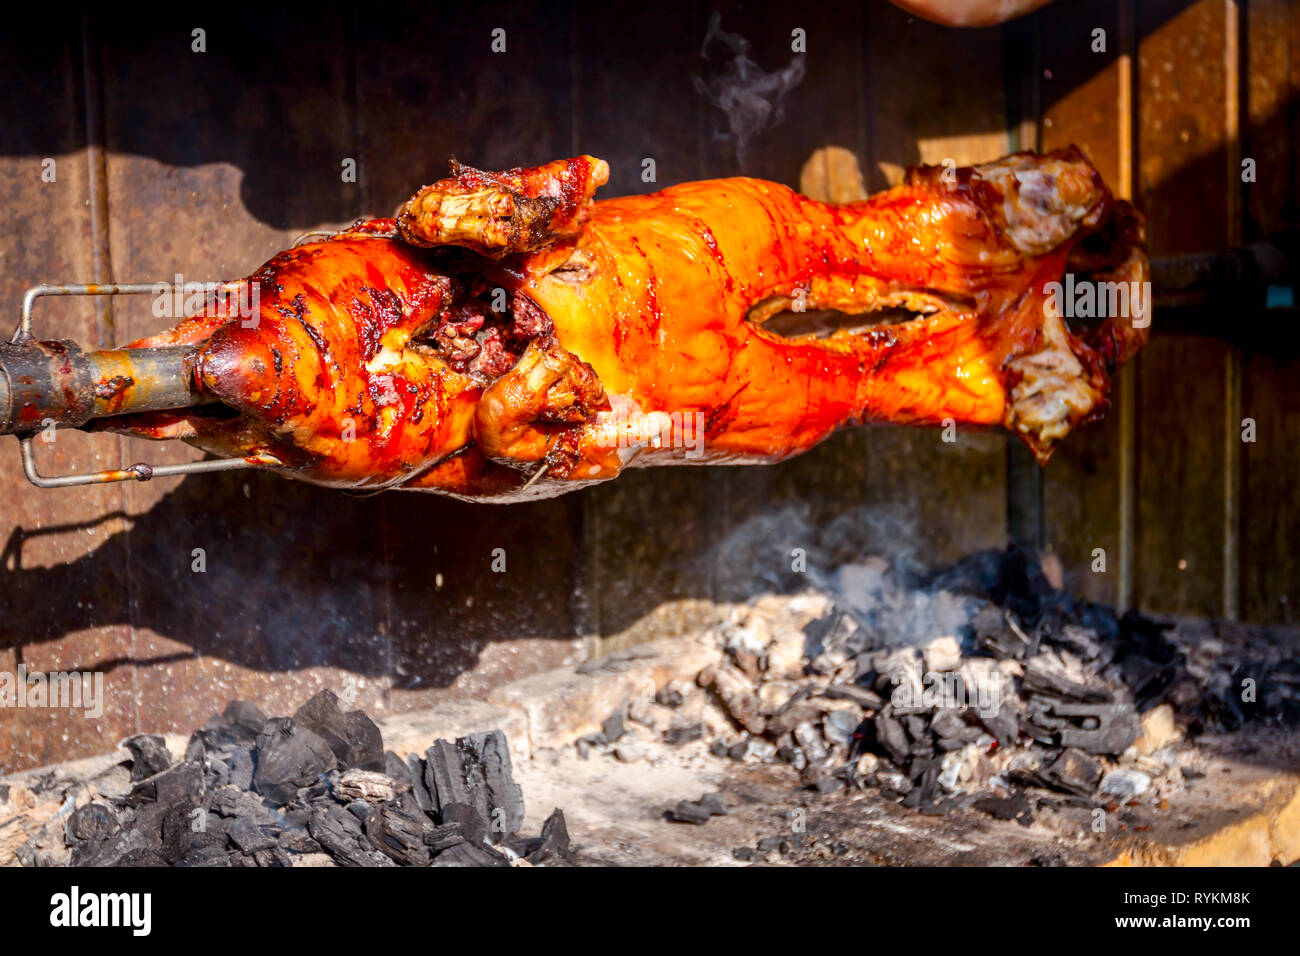 Pig is being grilled slowly on spit in traditional way, cooked with charcoal, fatty roasted meat Stock Photo